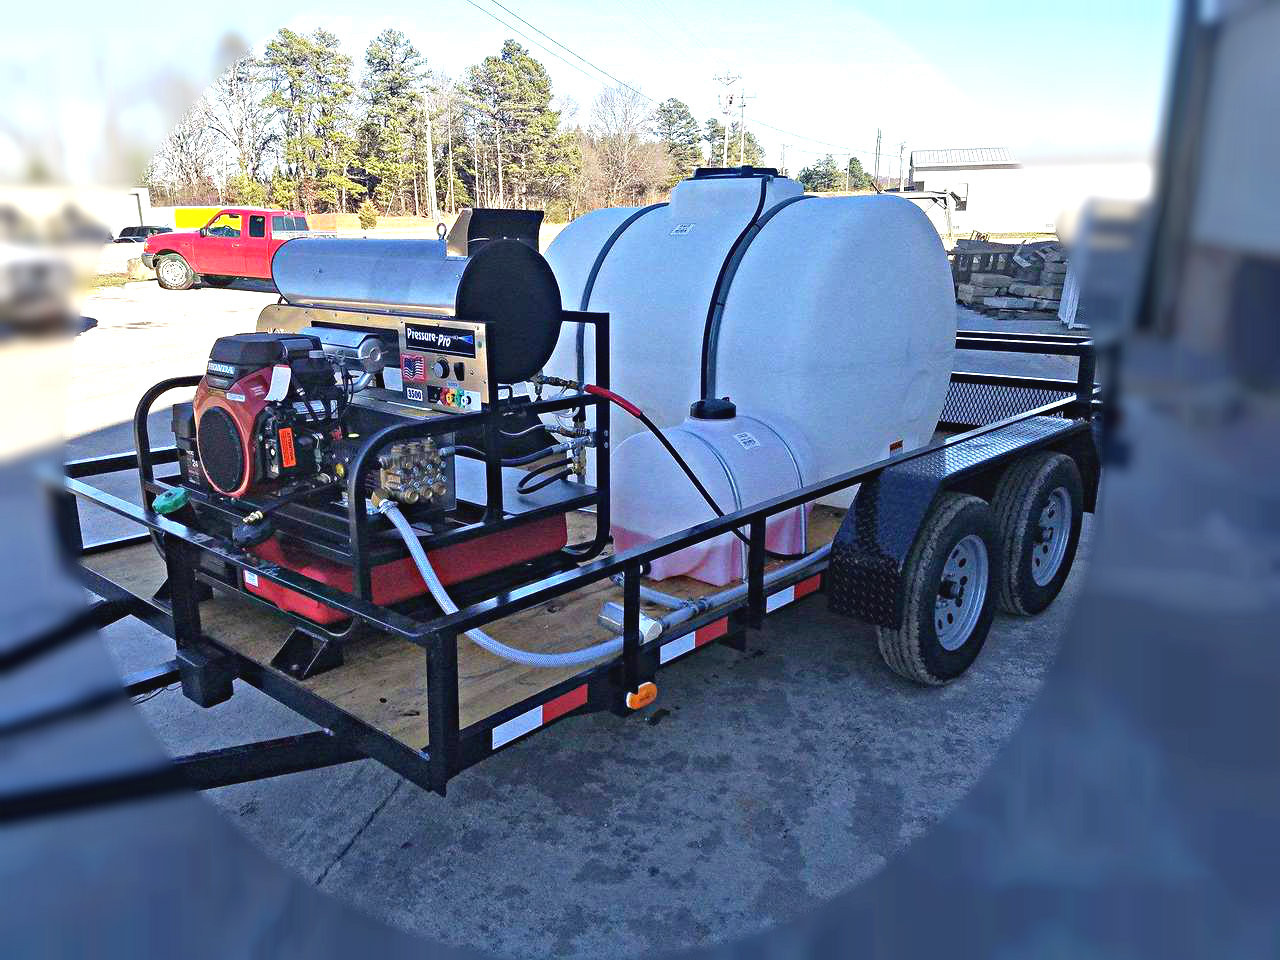 TRAILER MOUNTED HOTSY HEATED PRESSURE WASHER 80 hours w/550 GAL water tank